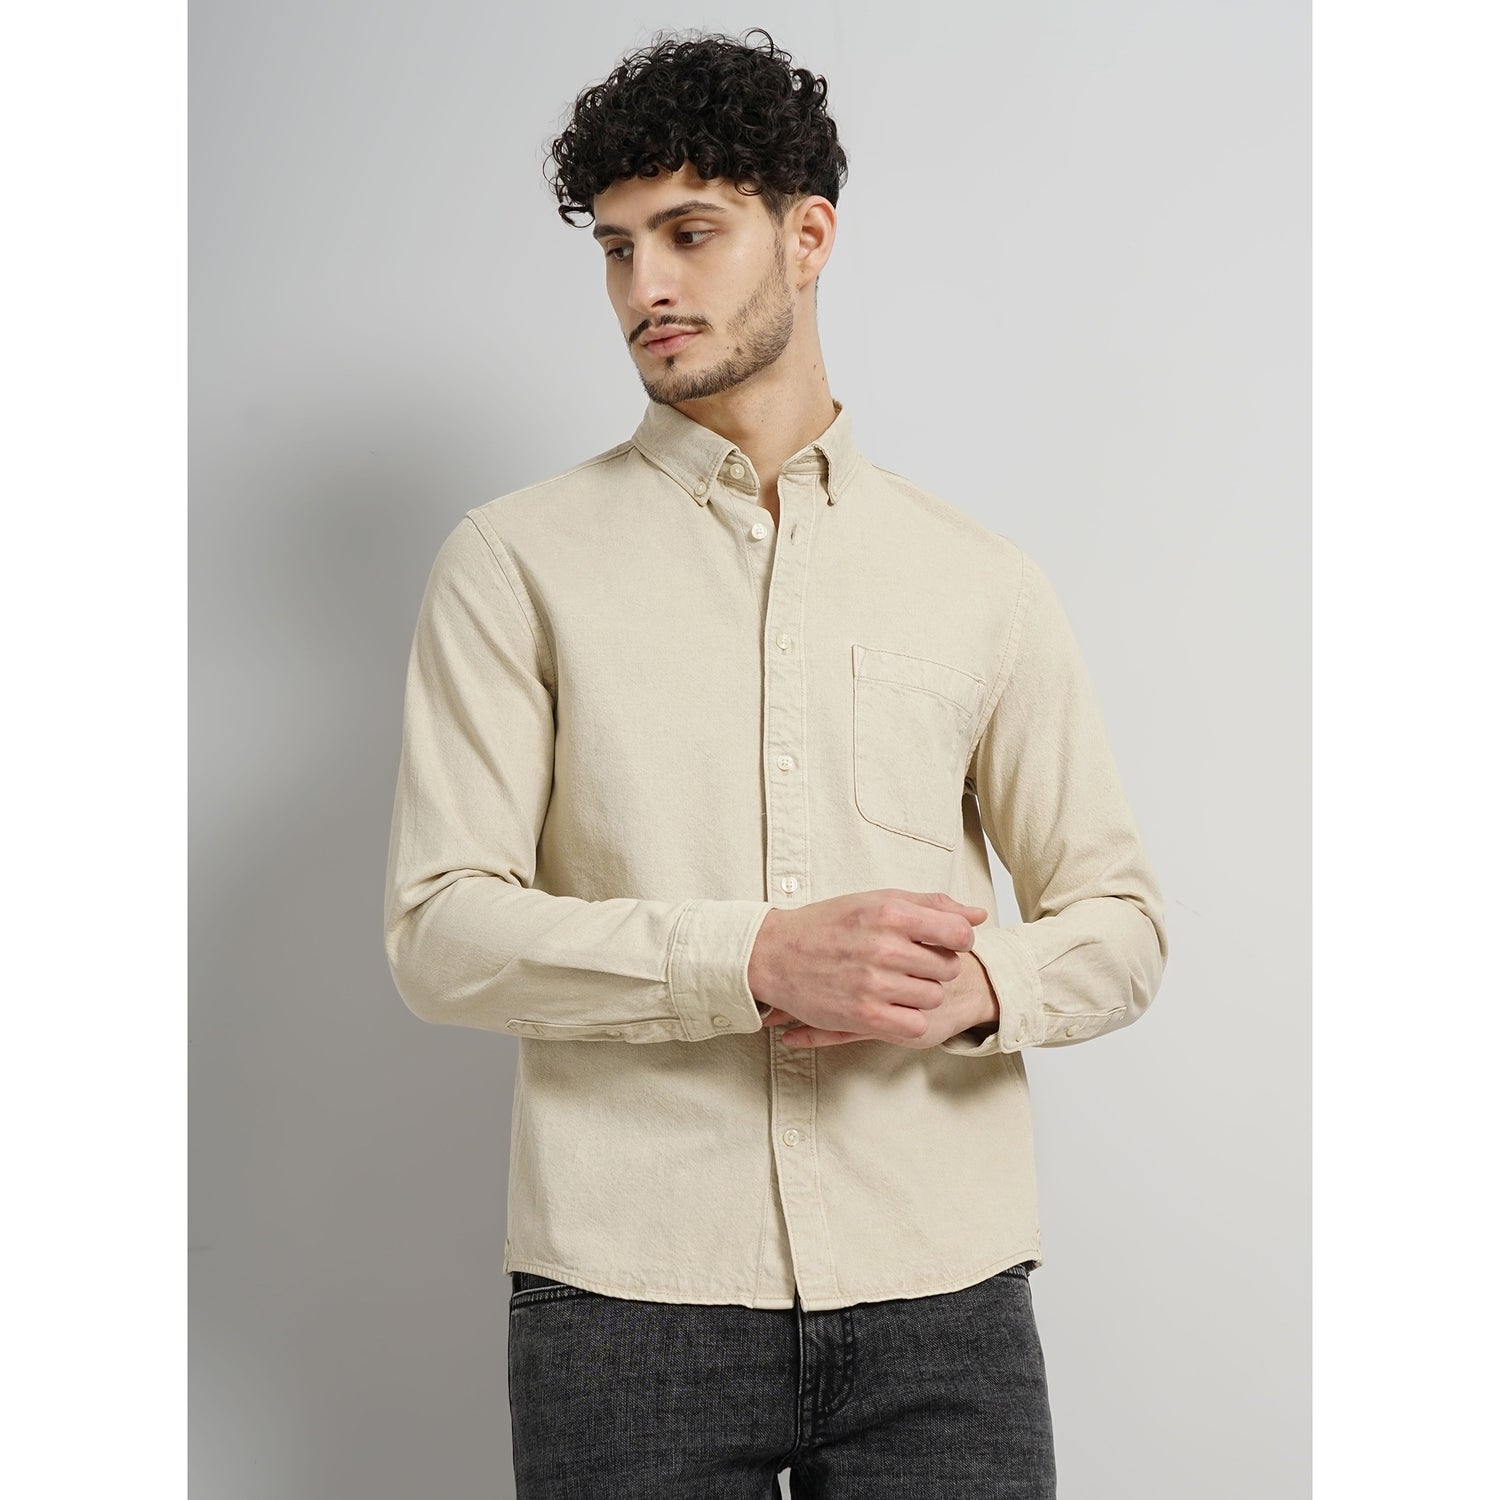 Men Beige Solid Oversized Cotton Over-Dyed Casual Shirt (GAINDIE)